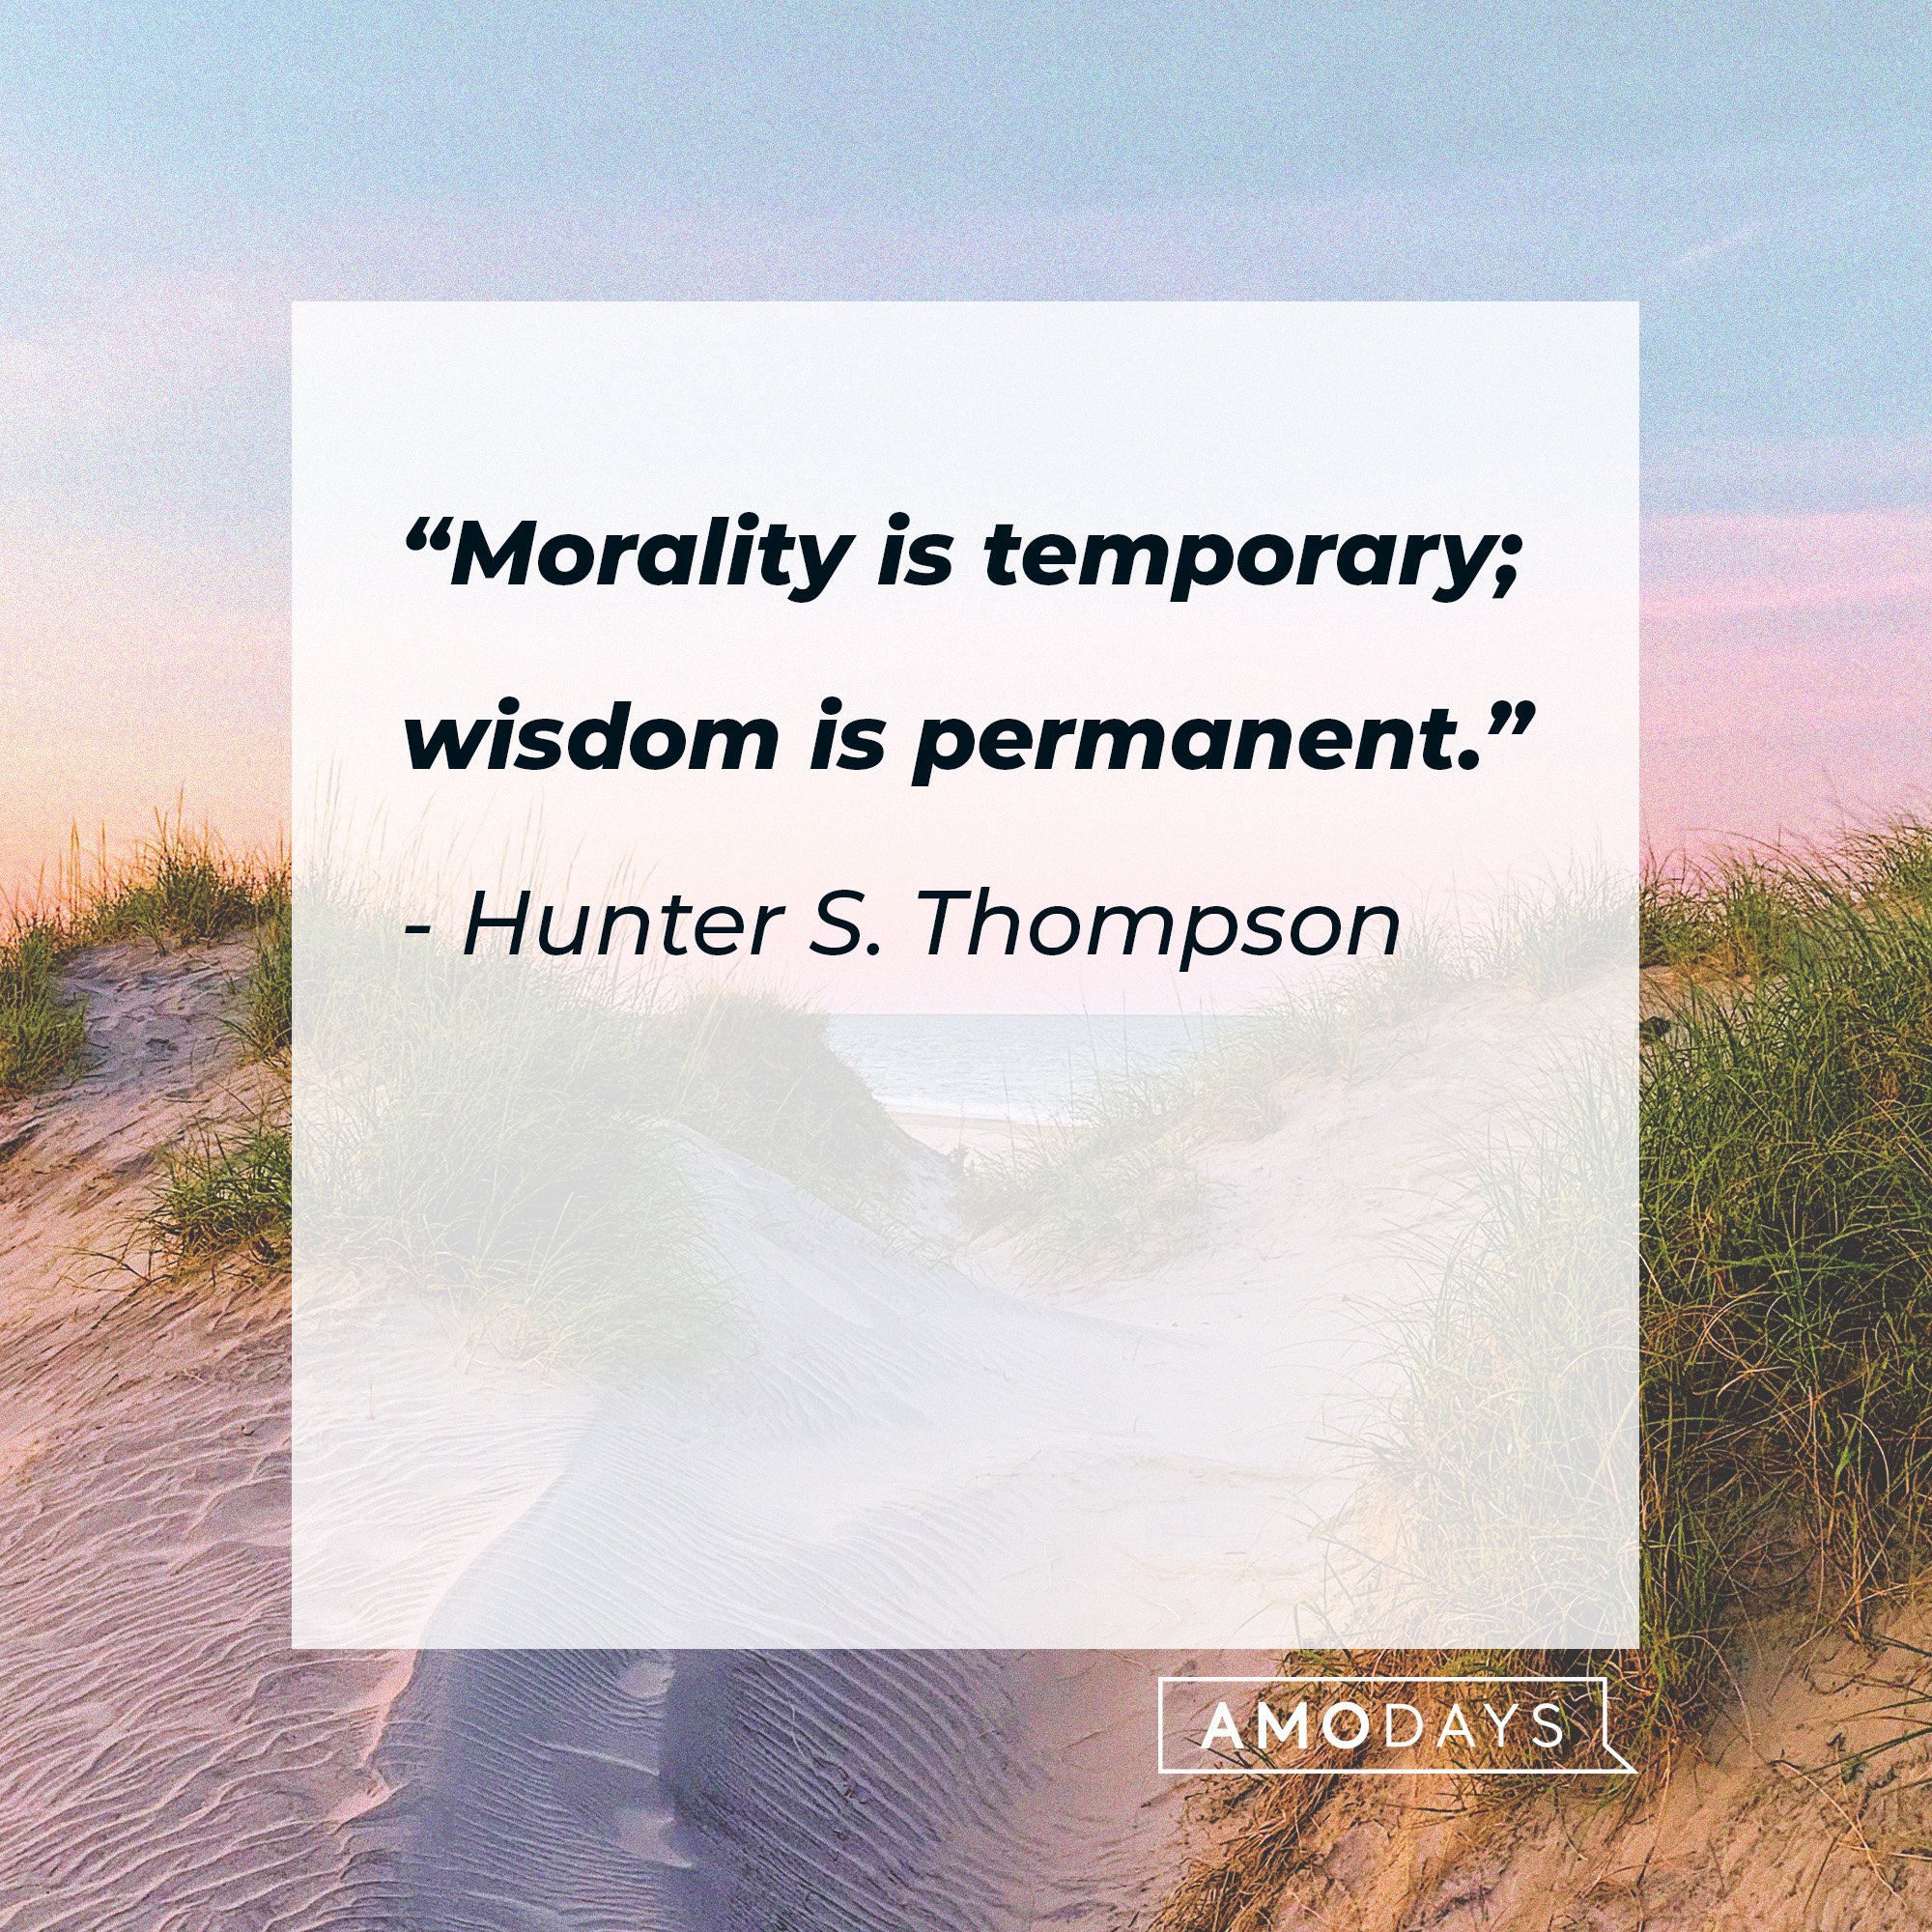 Hunter S. Thompson’s quote: “Morality is temporary; wisdom is permanent.” | Image: AmoDays